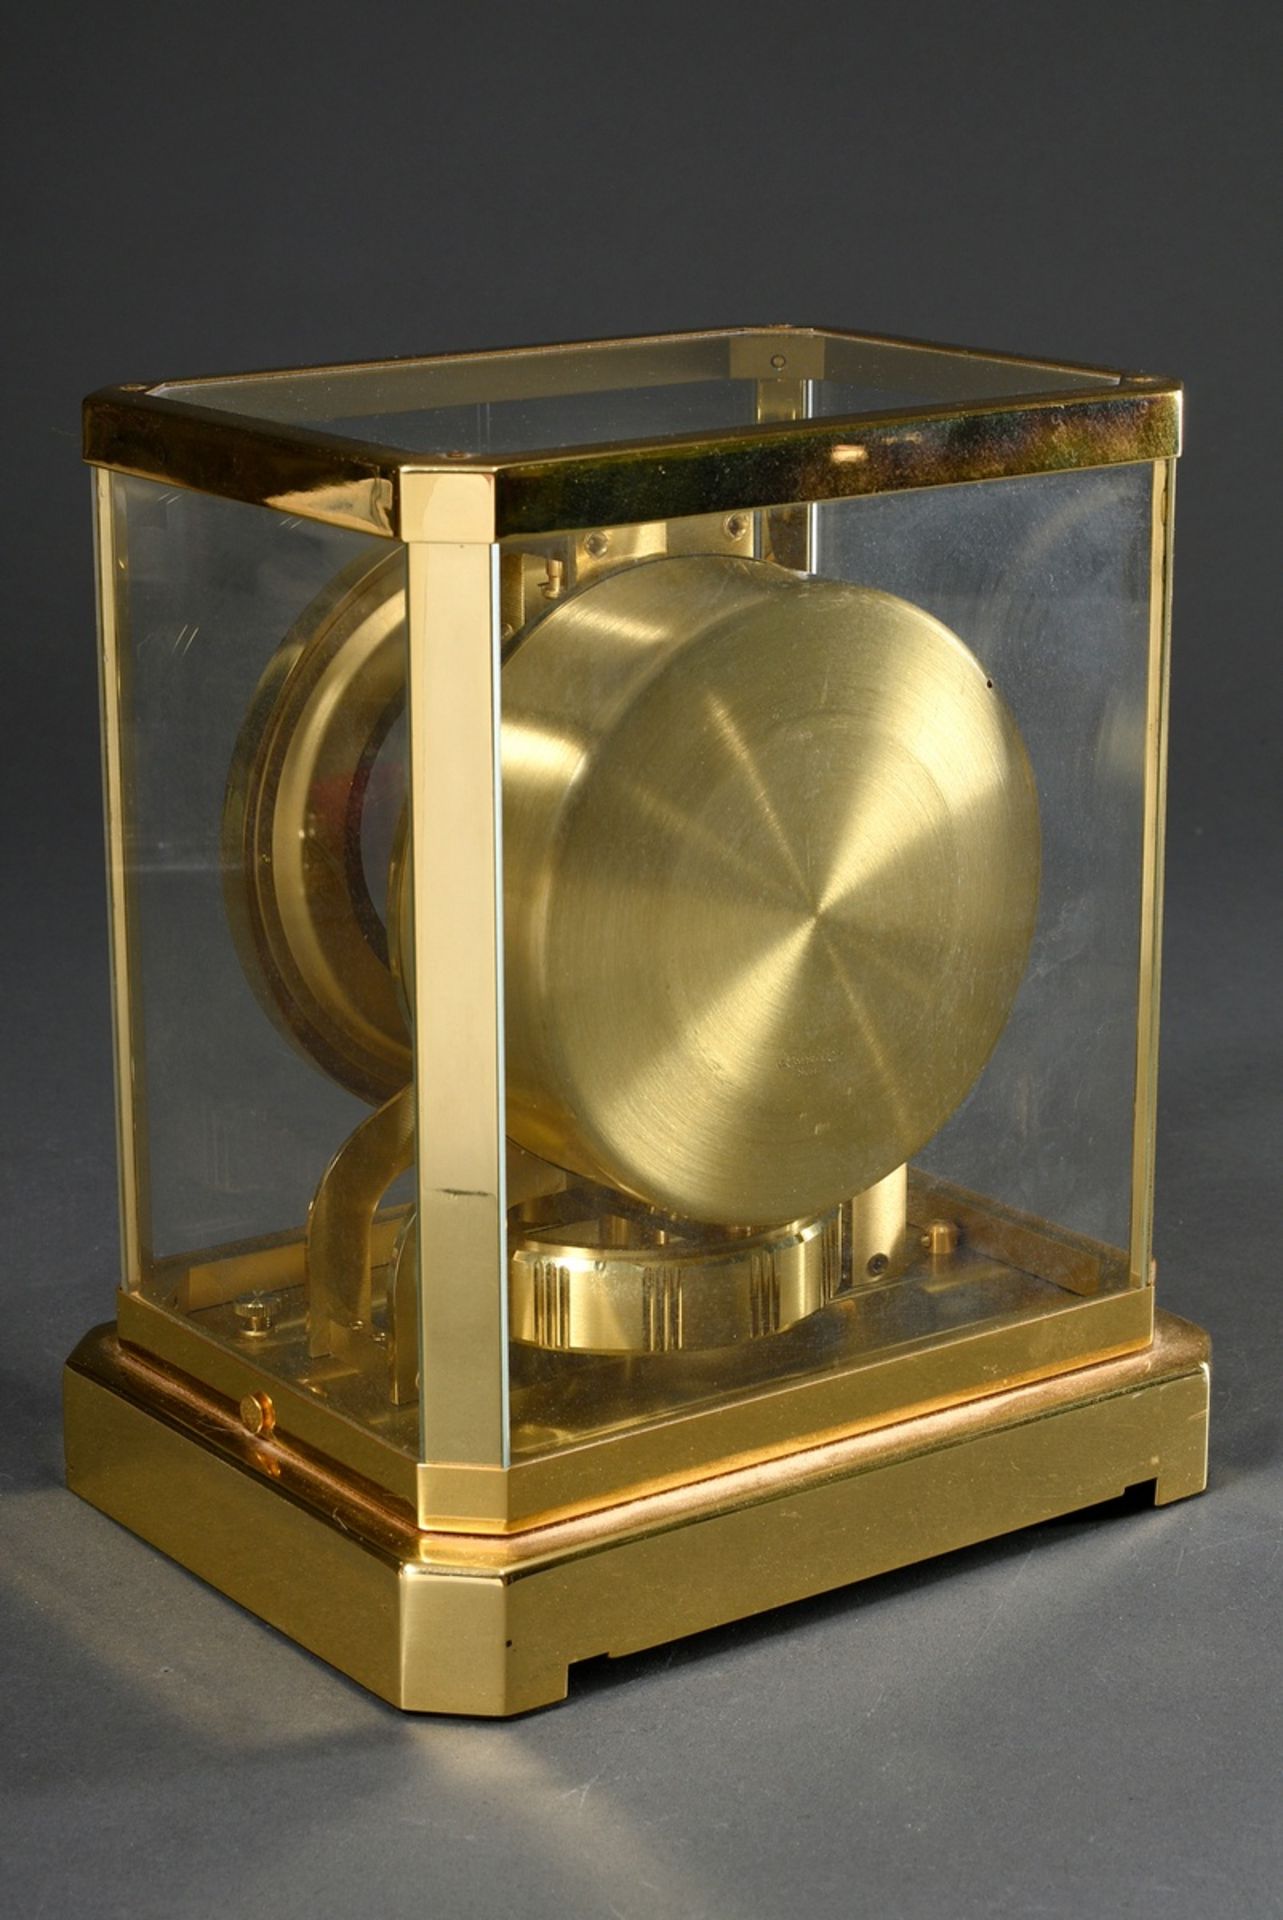 Jaeger Le Coultre "Atmos" table clock, glazed gold-plated brass case, movement number 196633, 23.5x - Image 6 of 7